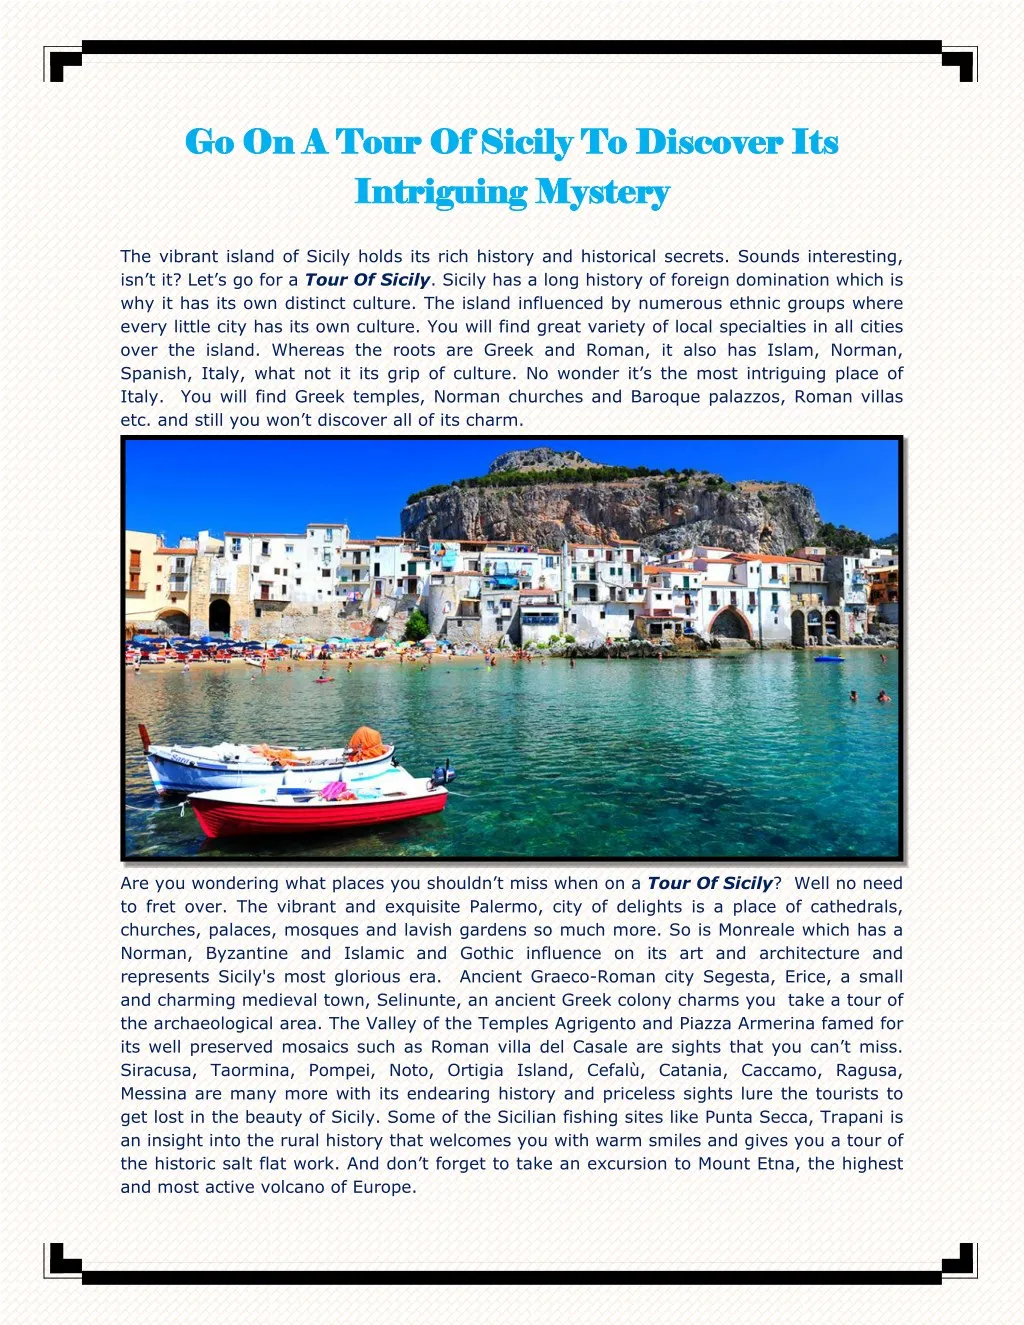 go on a tour of sicily to discover its intriguing